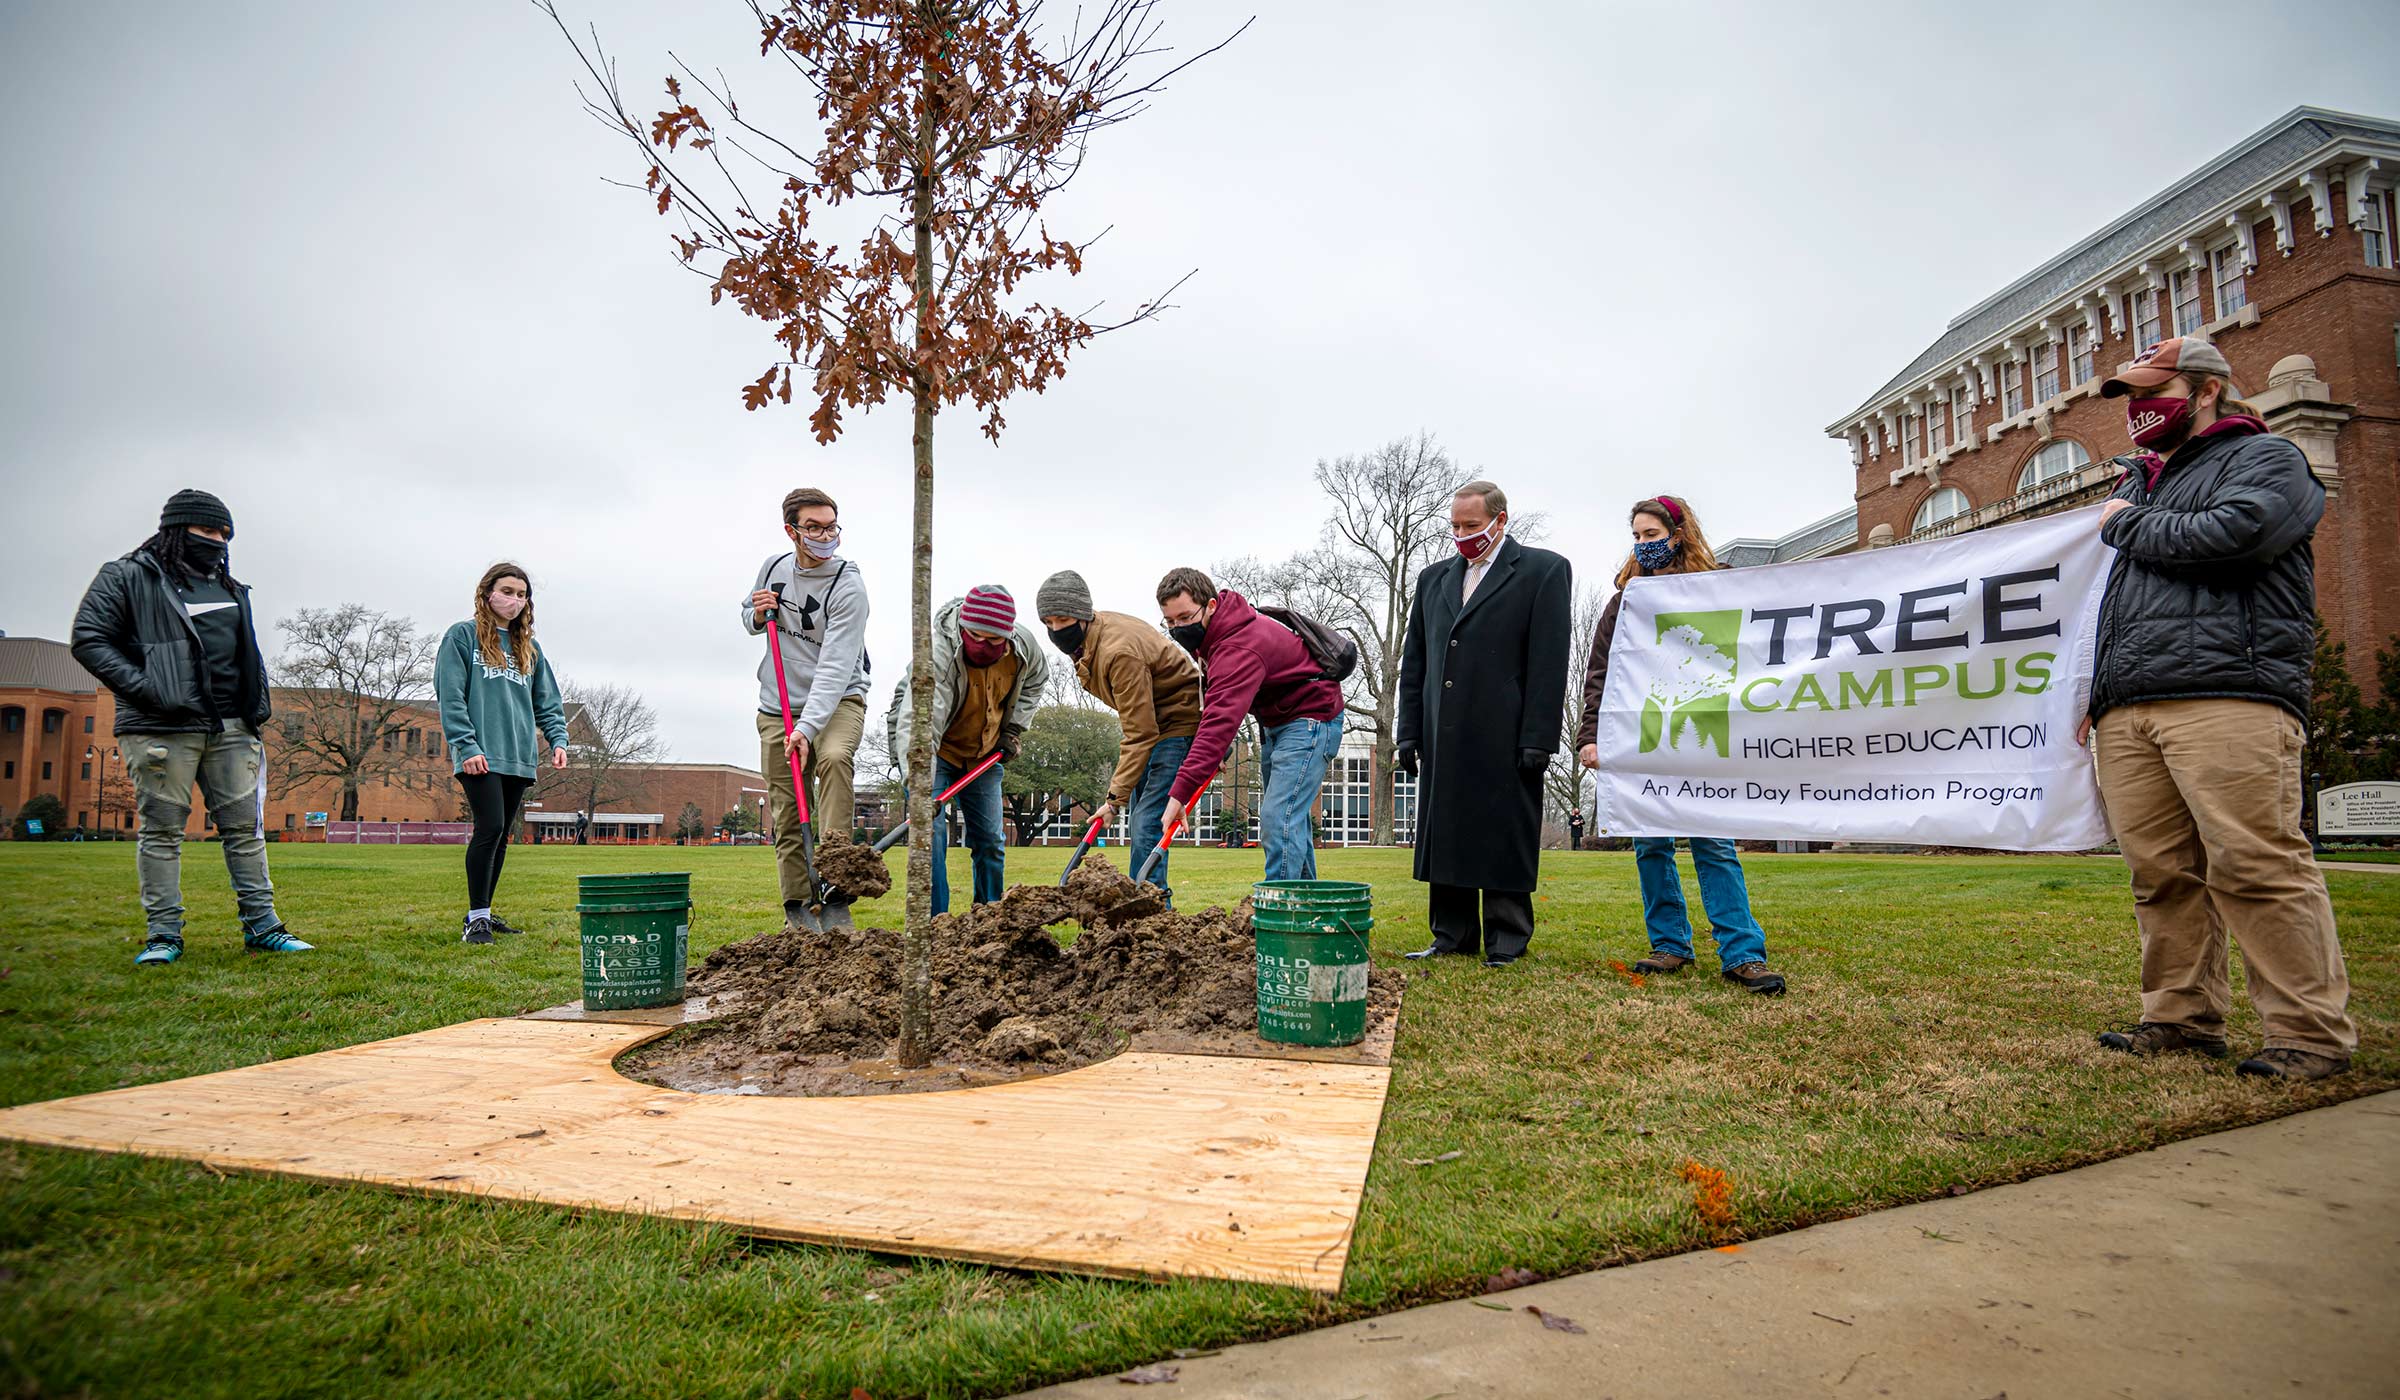 Students plant a tree on the Drill Field, with President Keenum looking on, along with two students holding a Tree Campus sign.